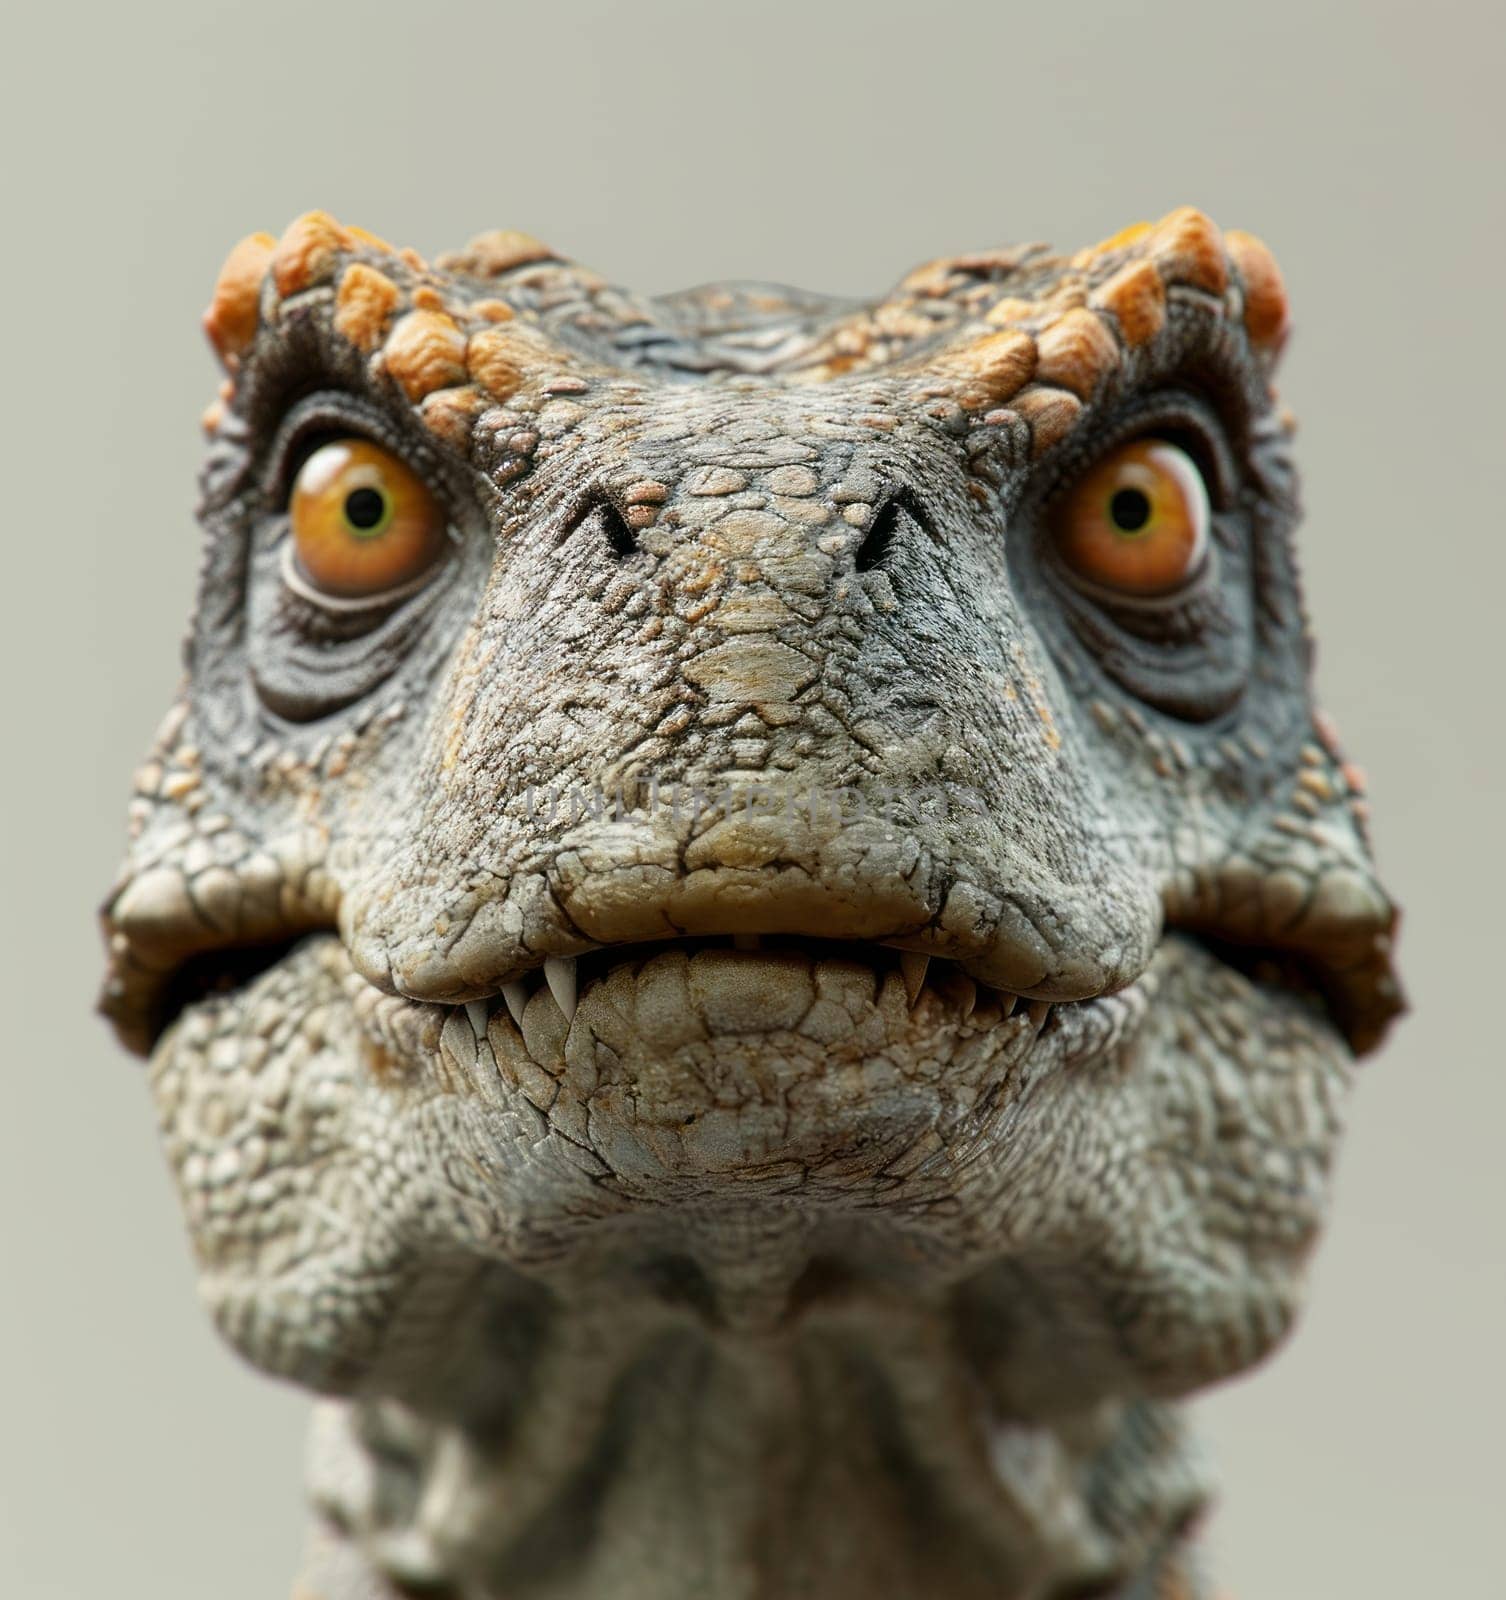 a close up of a dinosaur with big ears in 3k